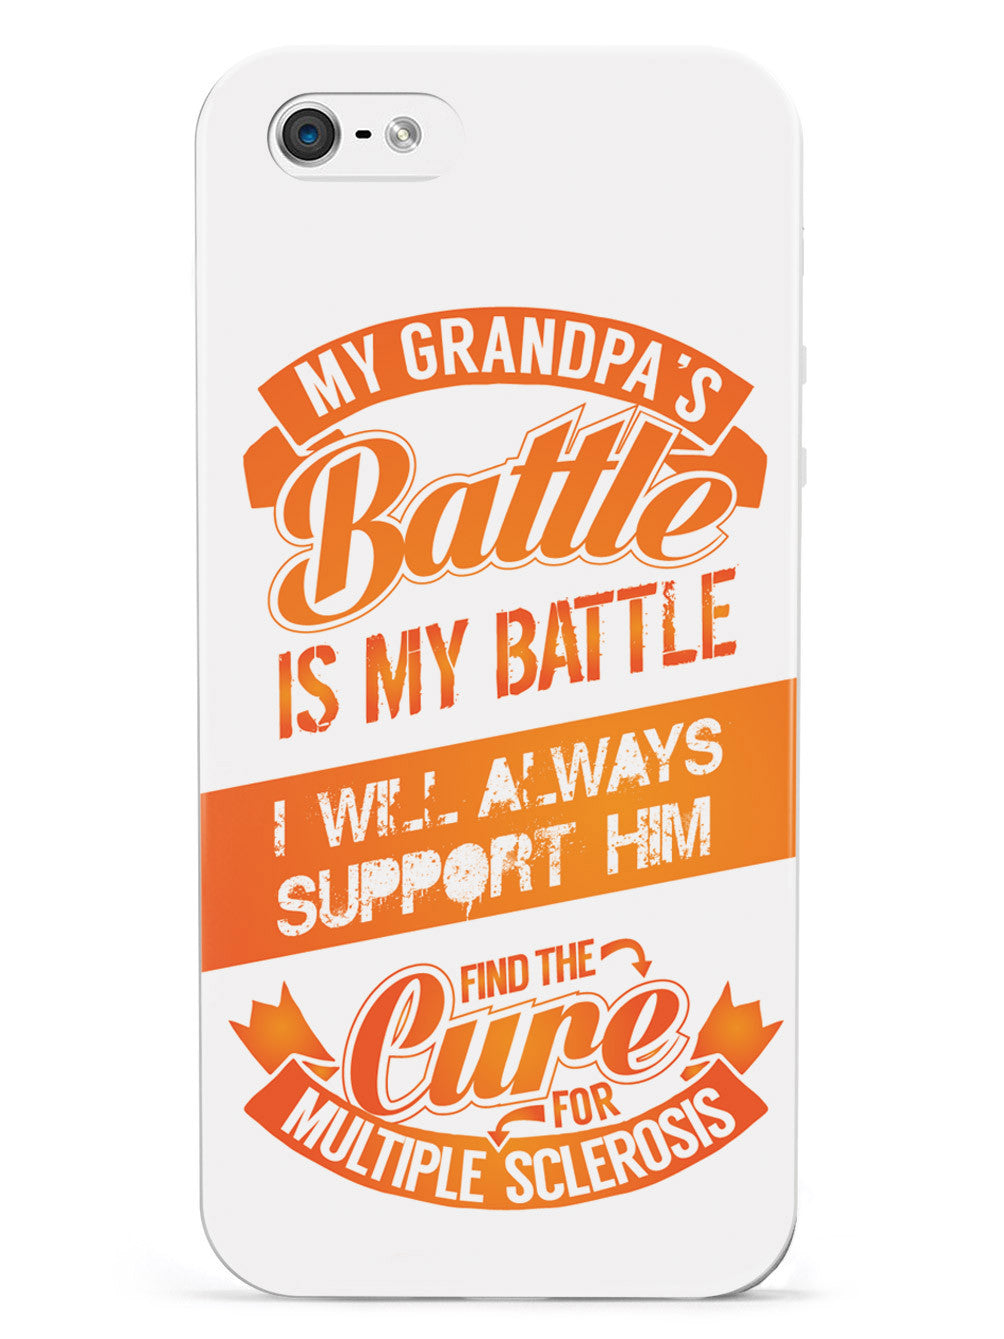 My Grandpa's Battle - Multiple Sclerosis Awareness/Support Case